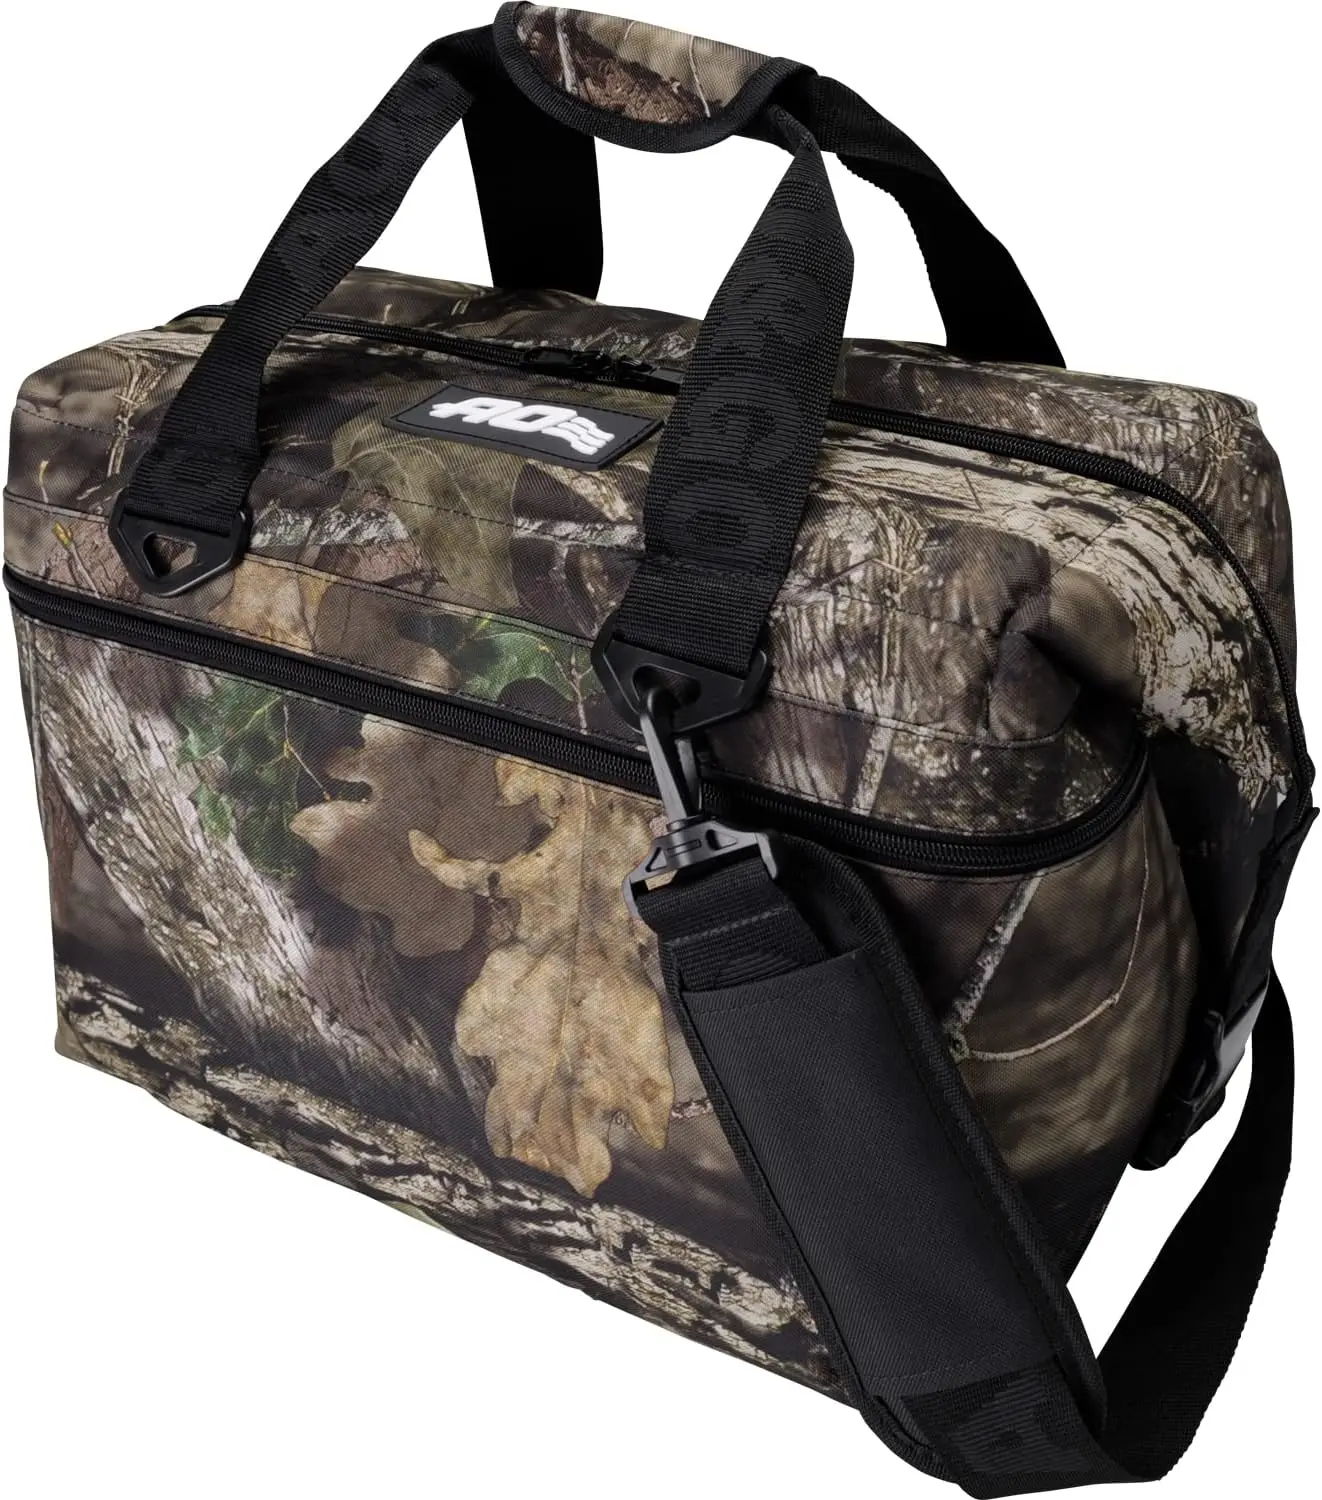 

Soft Cooler with High-Density Insulation, Mossy Oak, 24-Can